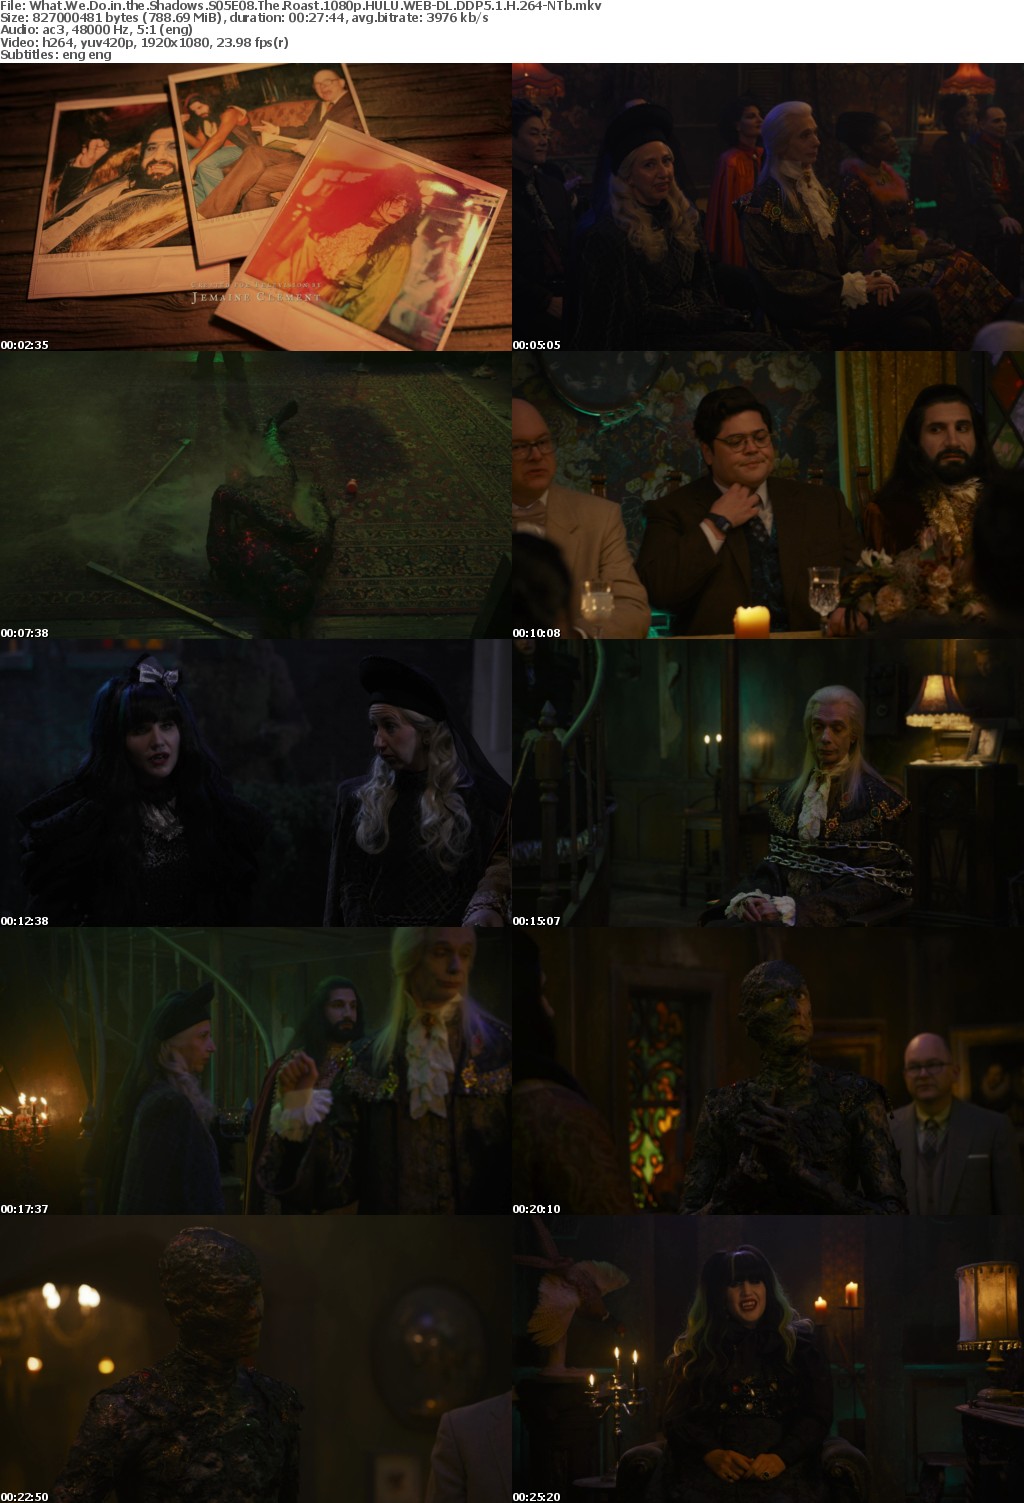 What We Do in the Shadows S05E08 The Roast 1080p HULU WEB-DL DDP5 1 H 264-NTb